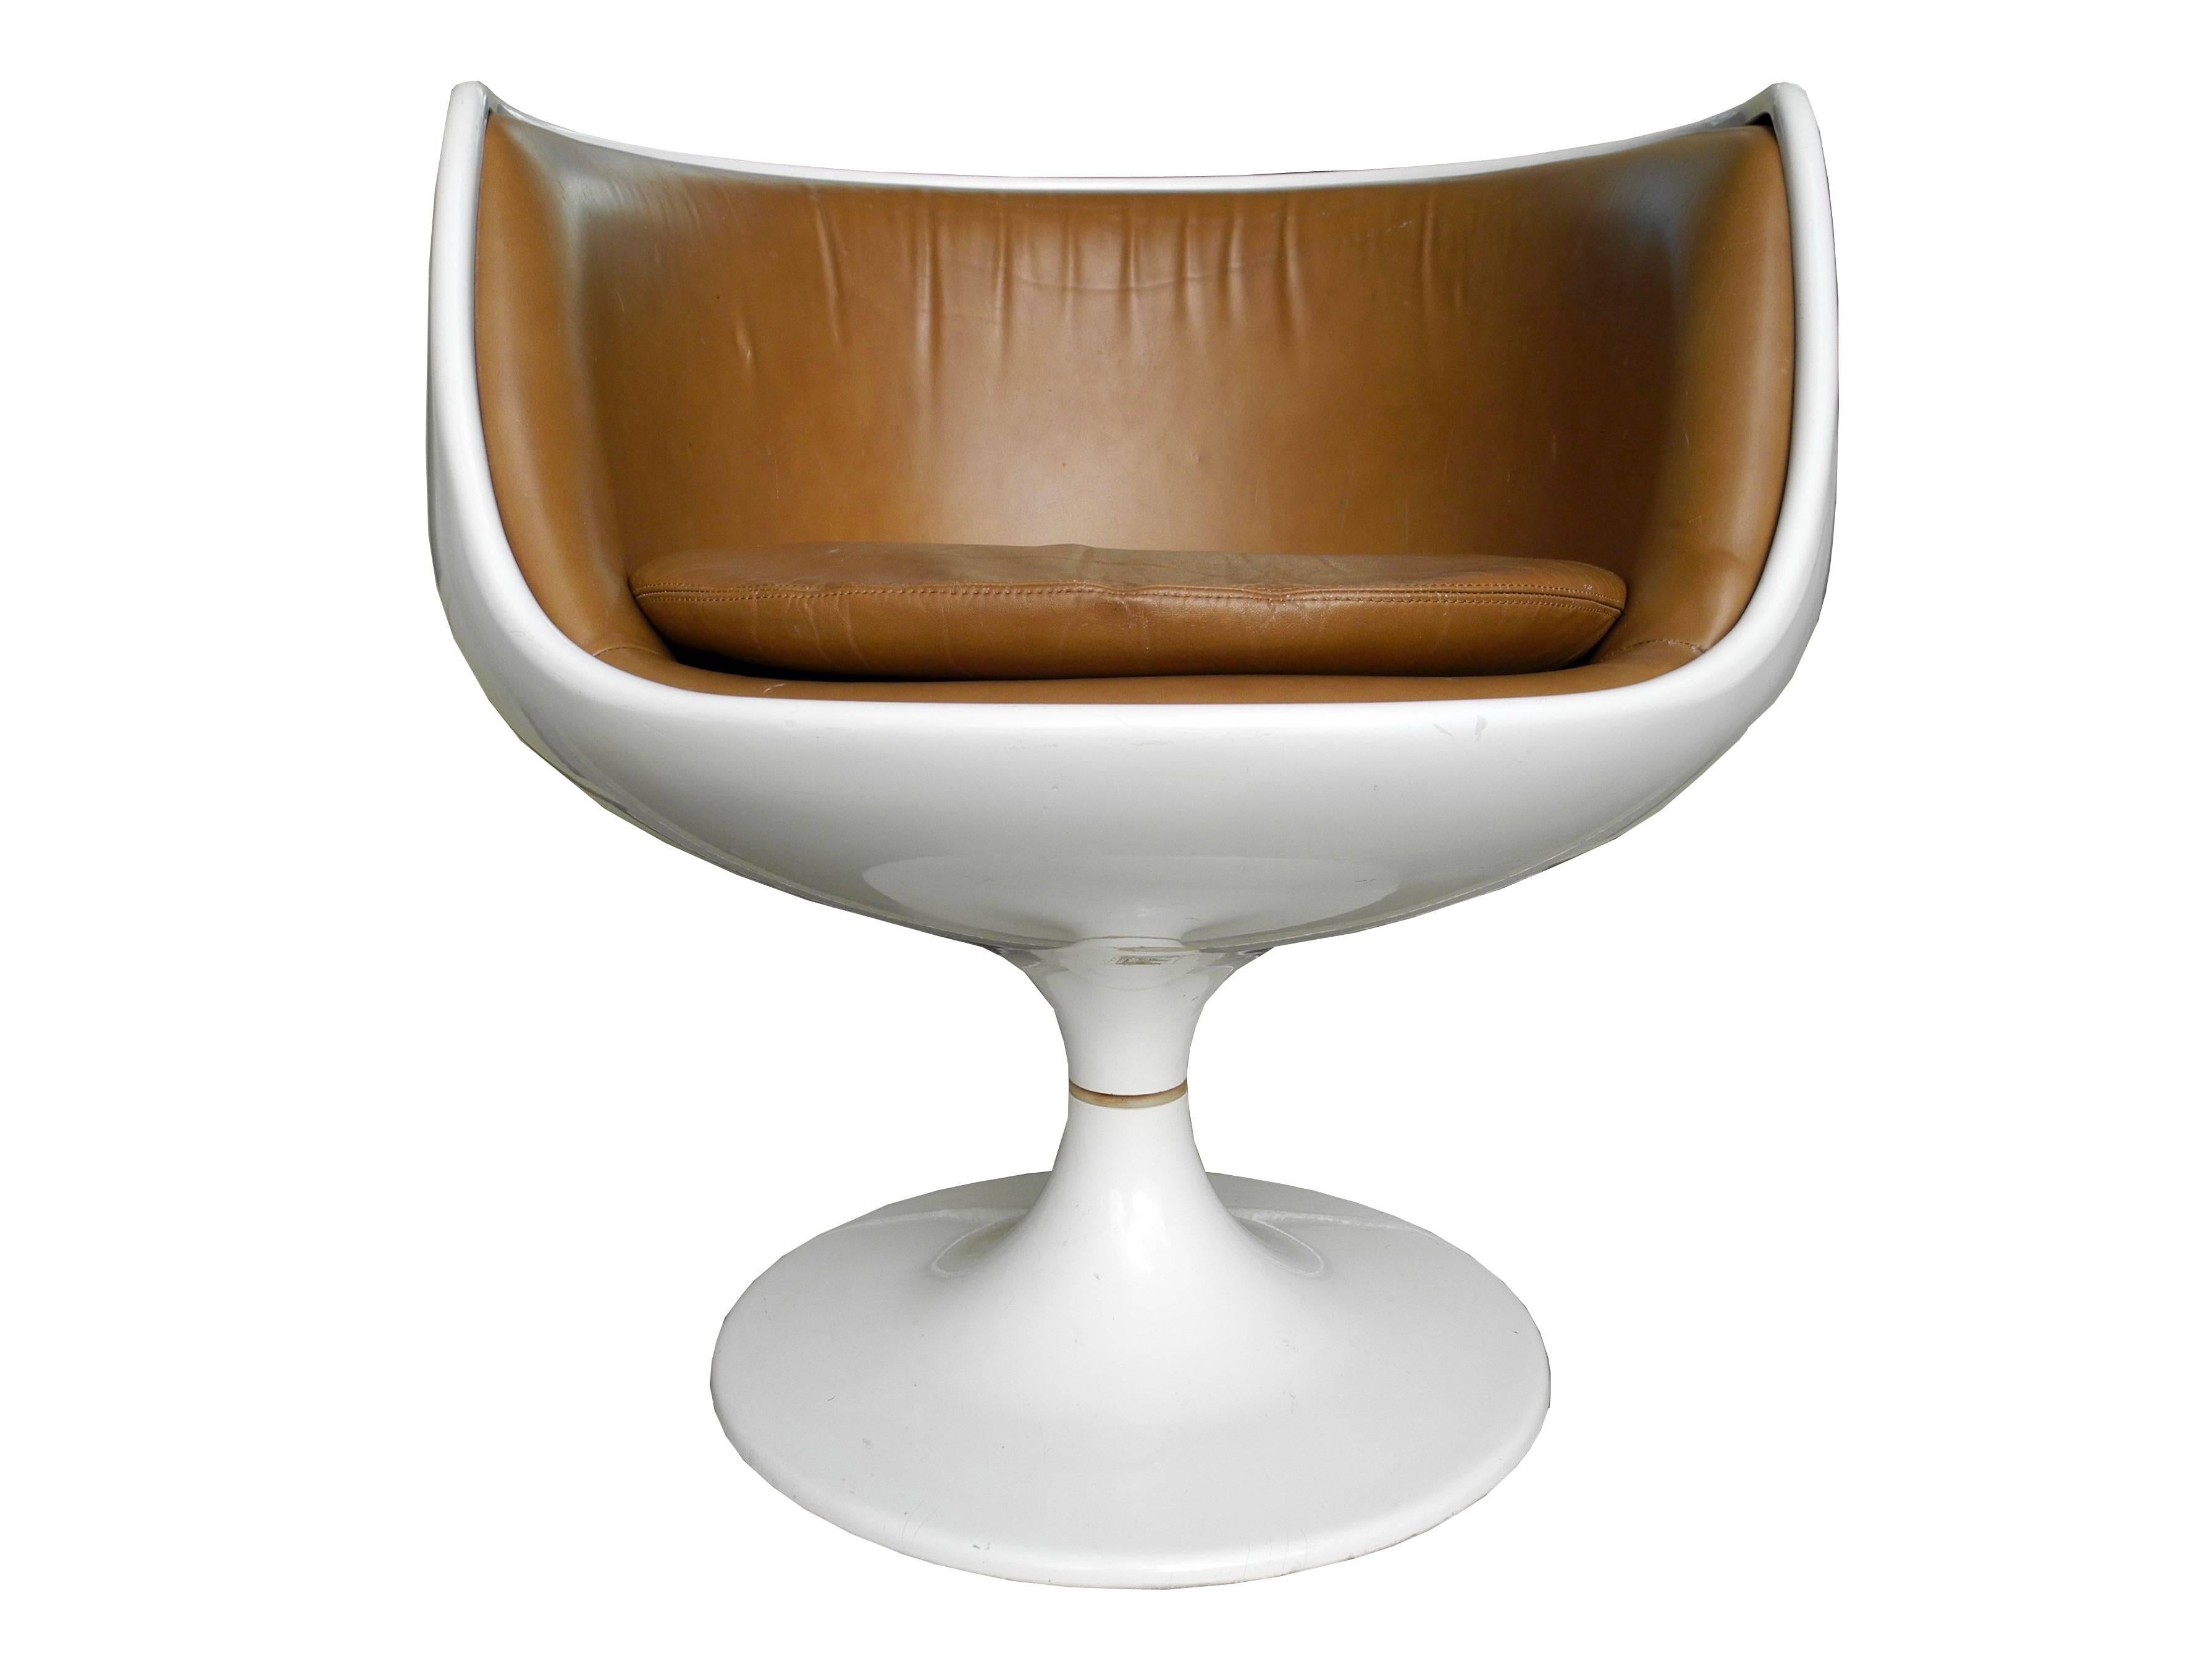 Designed by Eero Aarnio for Asko, produced in the 1960s in Finland, this mod swivel chair was called the 